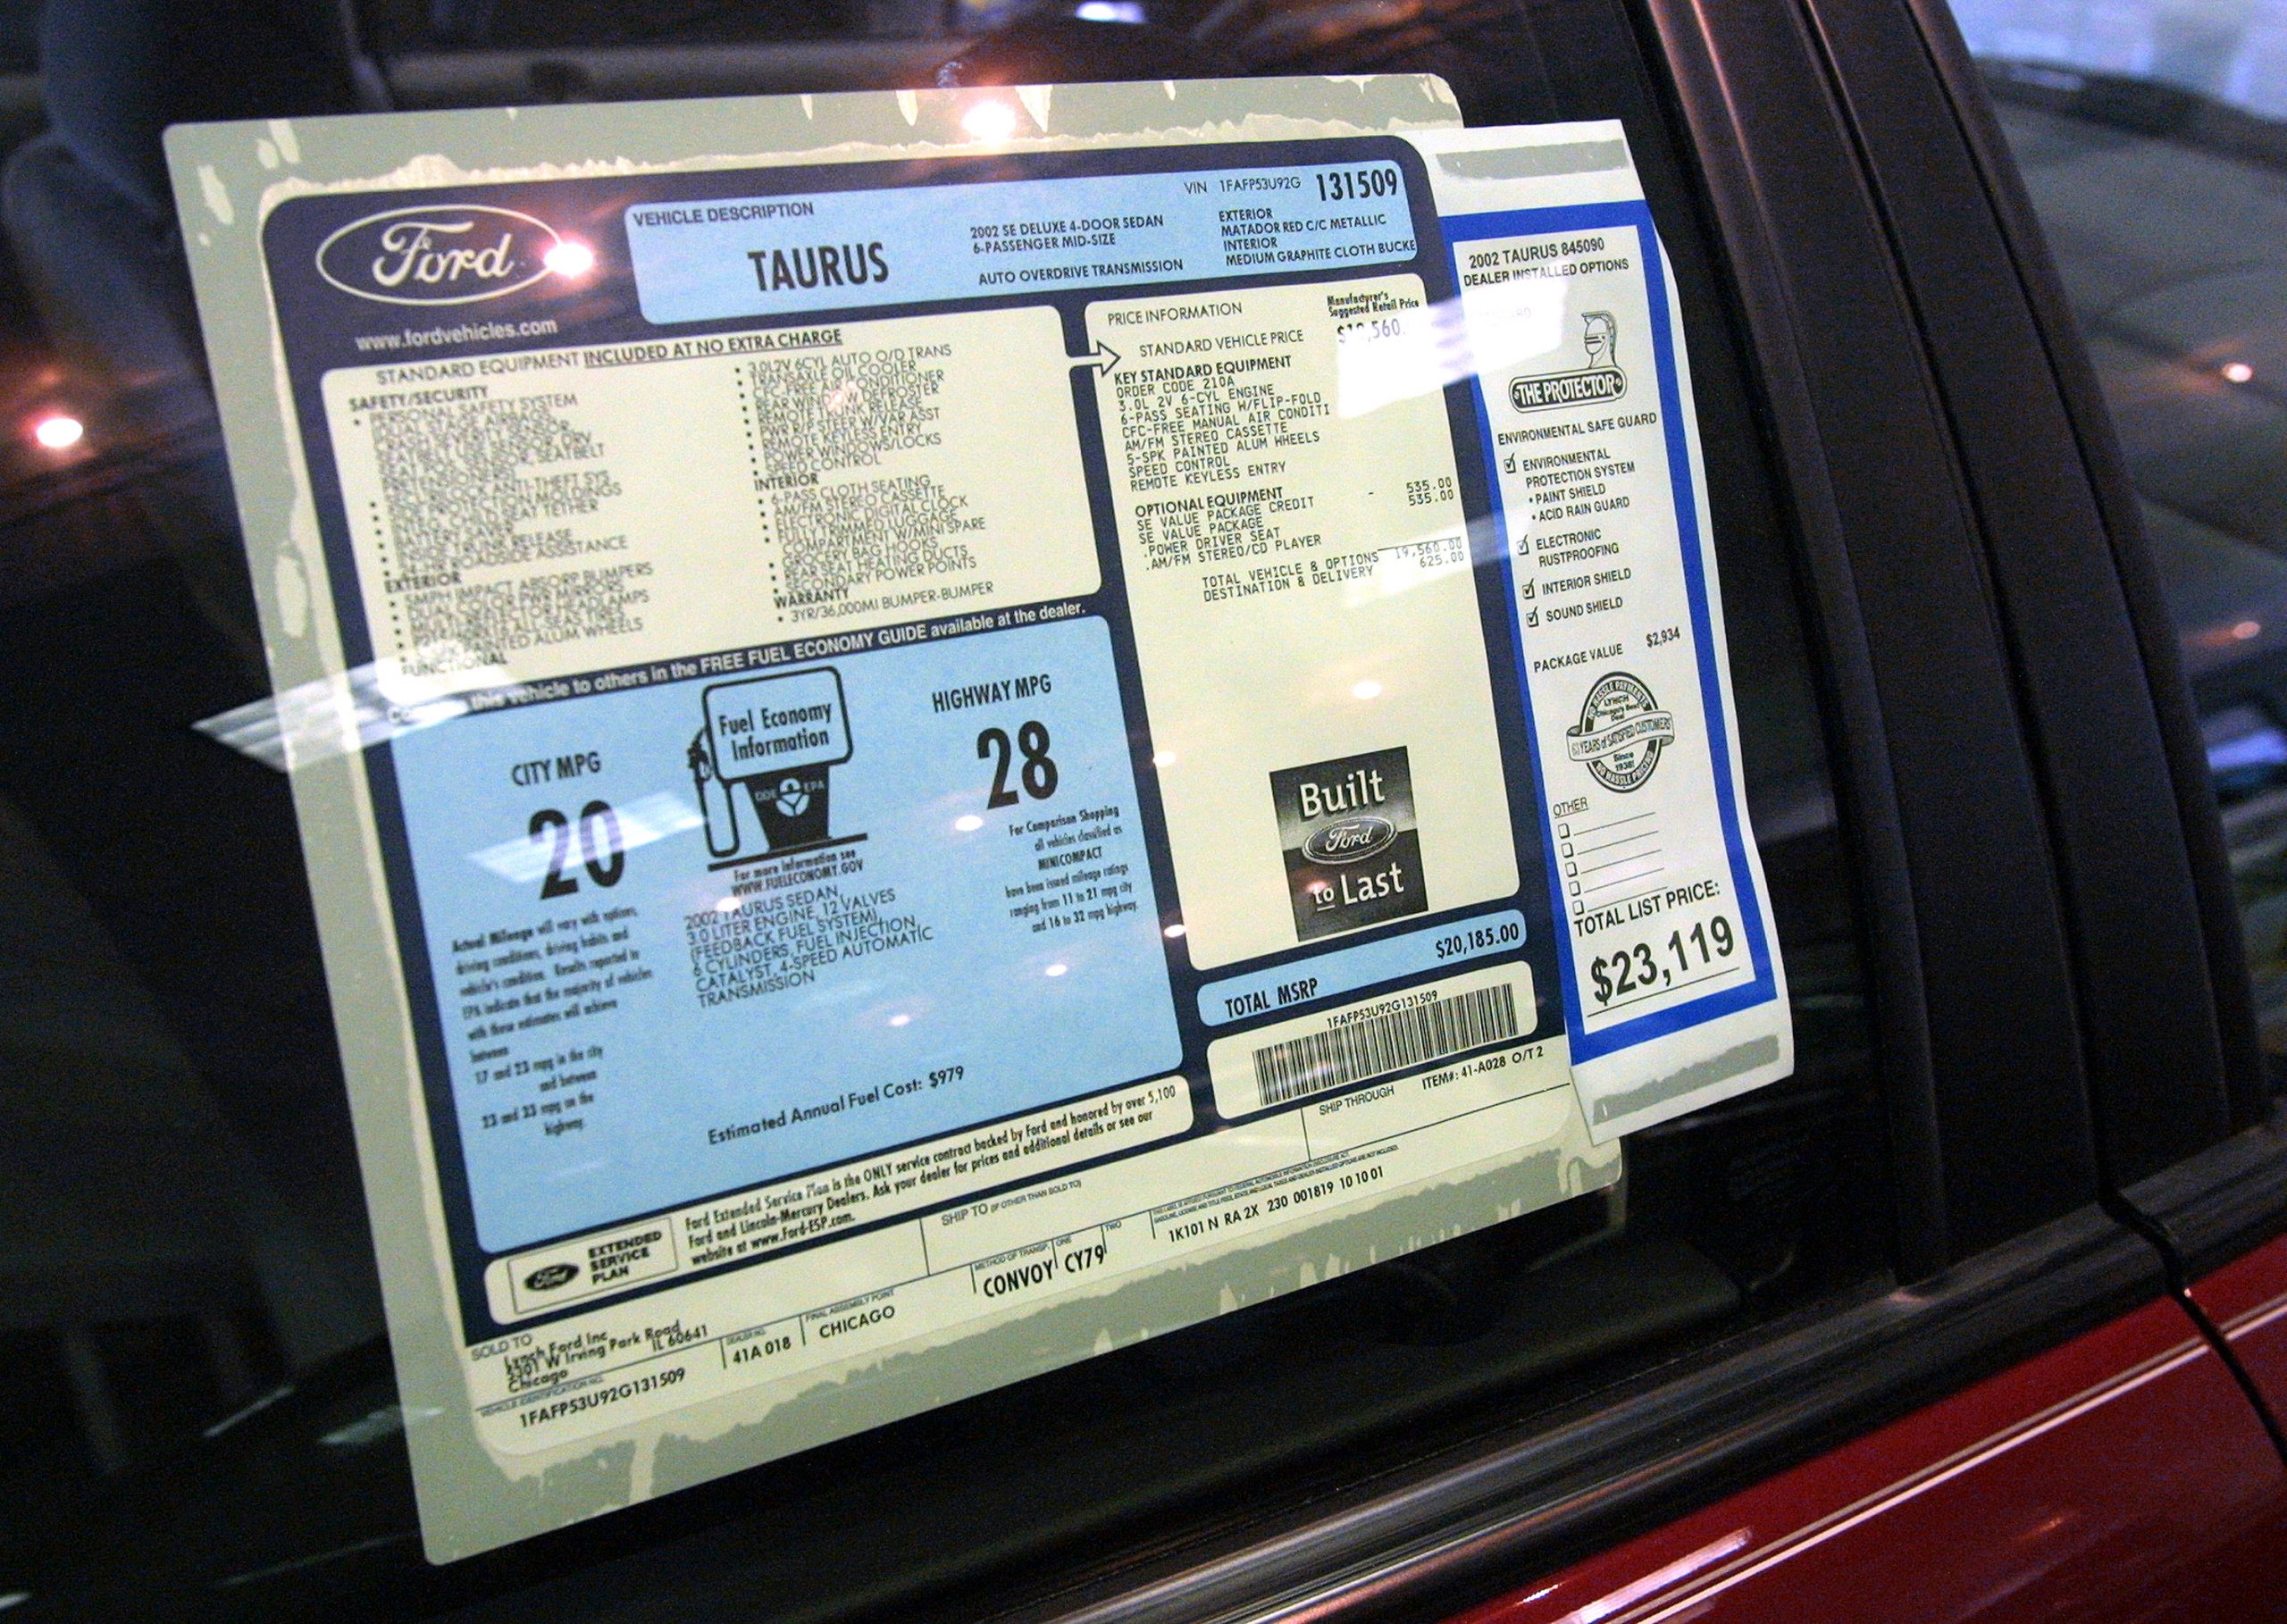 The window sticker of a 2003 Ford showing an MSRP of $23,119, now the price of a used car has surged well above that.